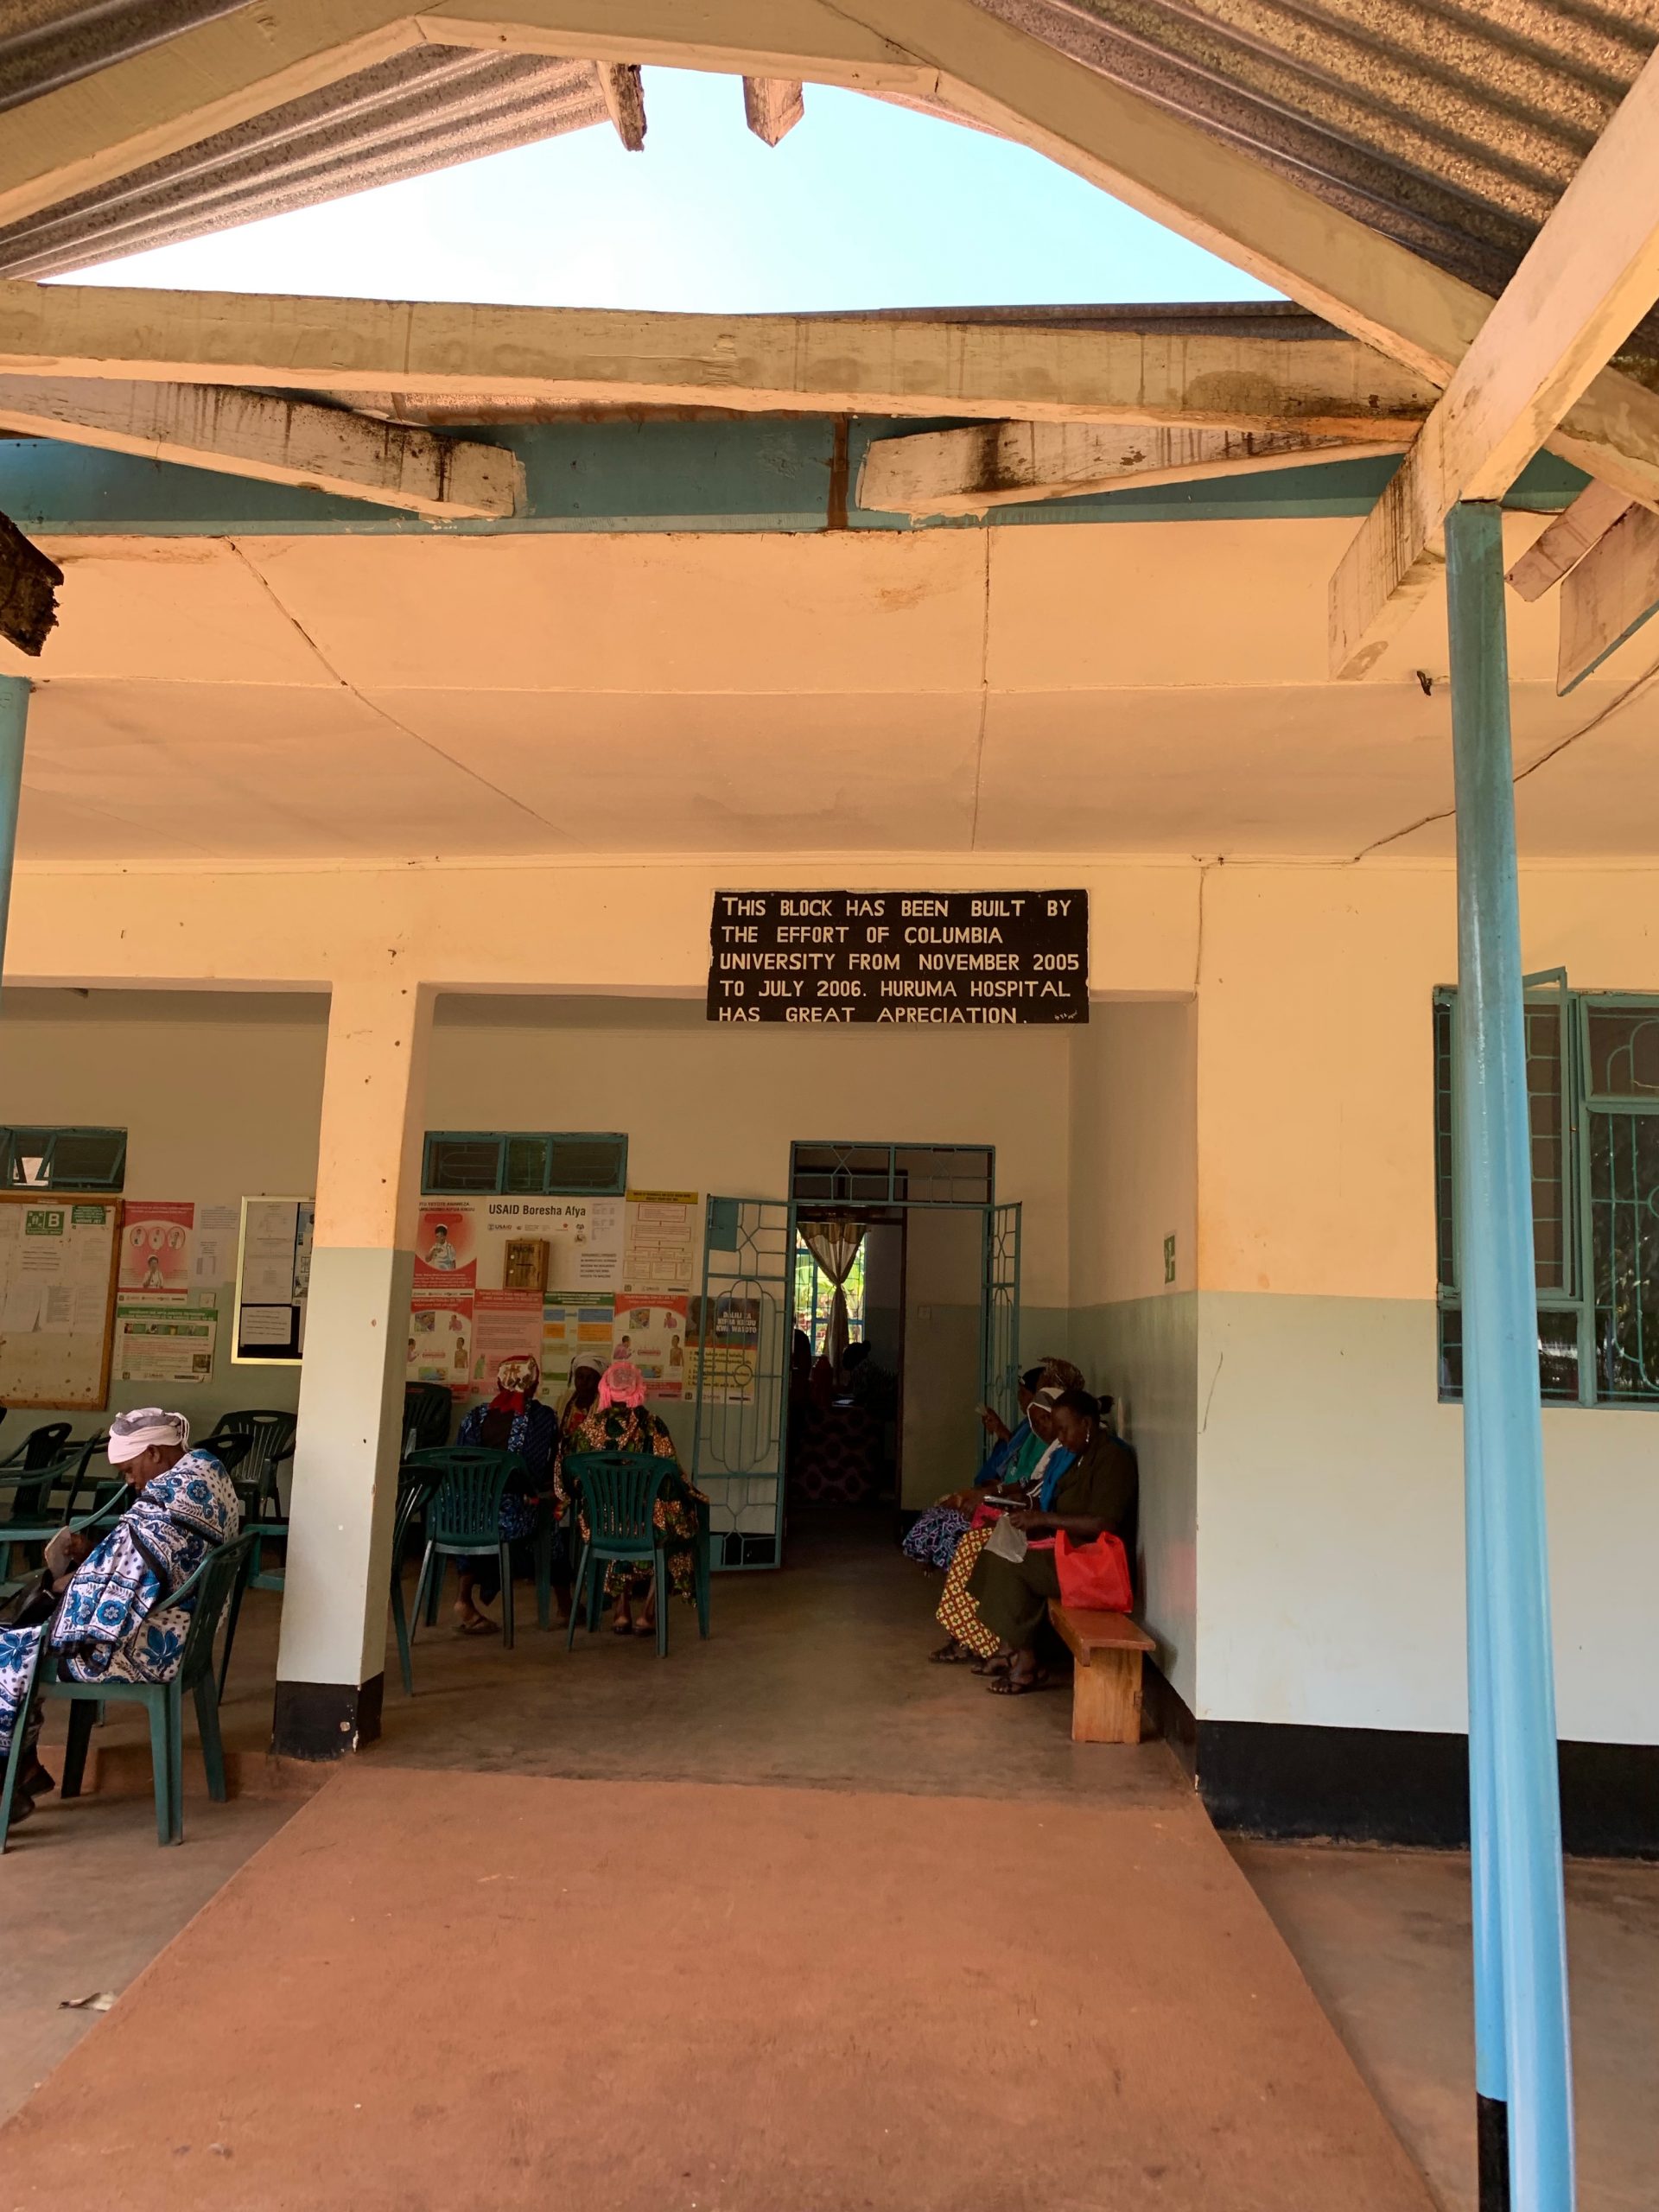 Figure 1: Exterior of outpatient clinic at Huruma Hospital donated by Columbia University